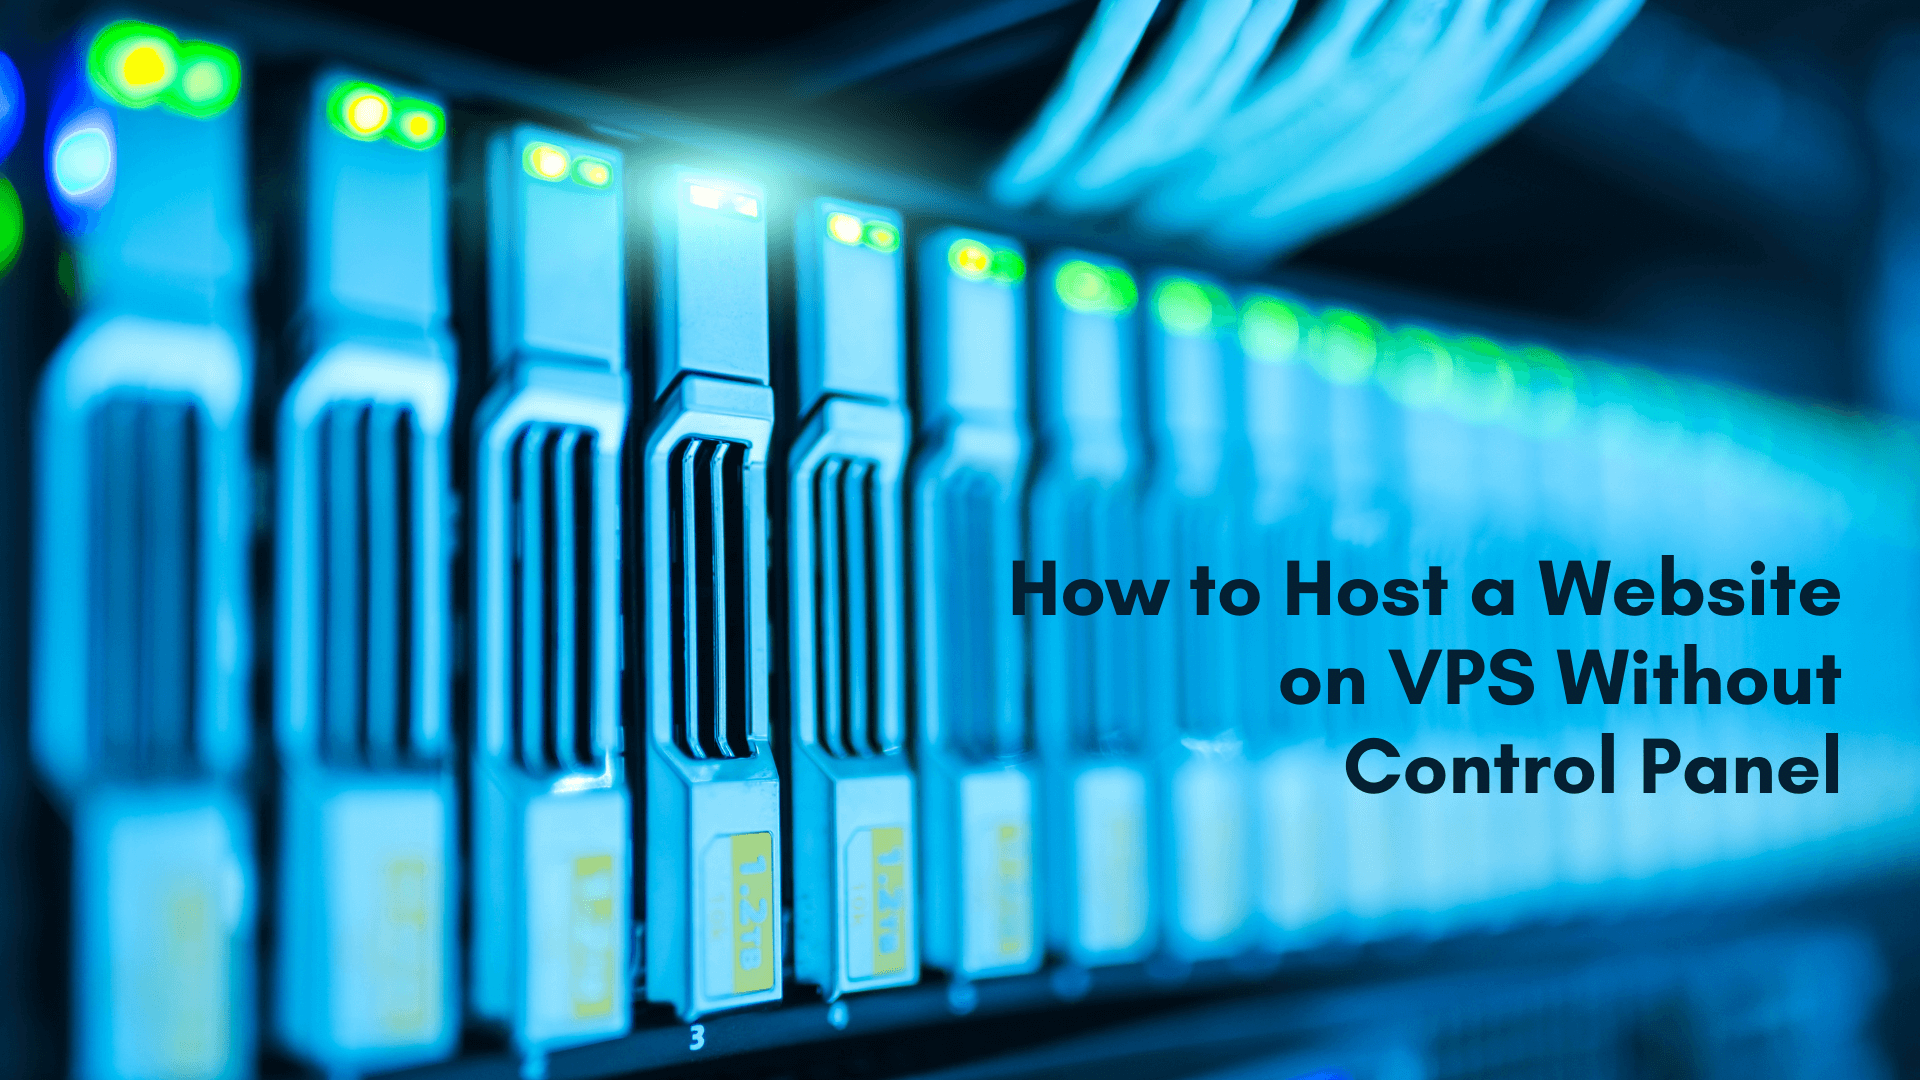 How-to-Host-a-Website-on-VPS-Without-Control-Panel-1